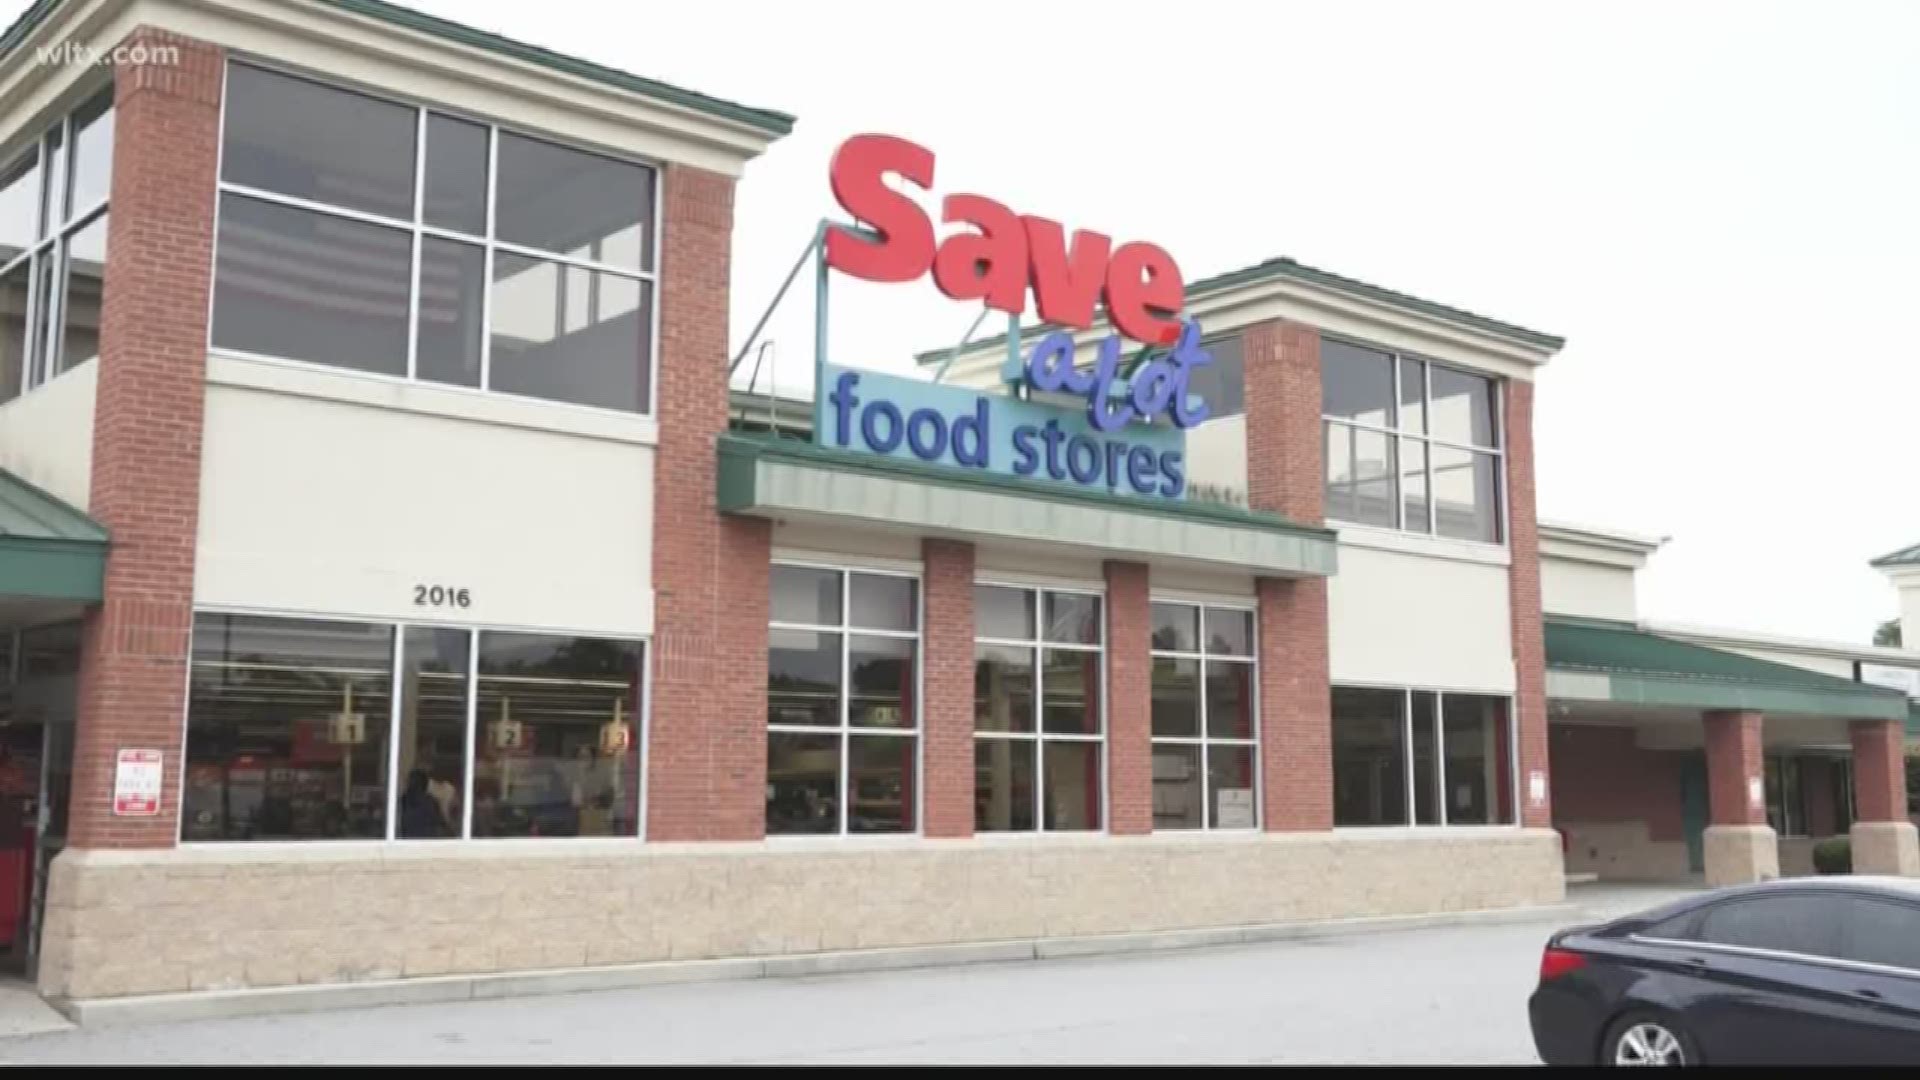 There's been growing concern about the potential closing of the grocery store on Harden street